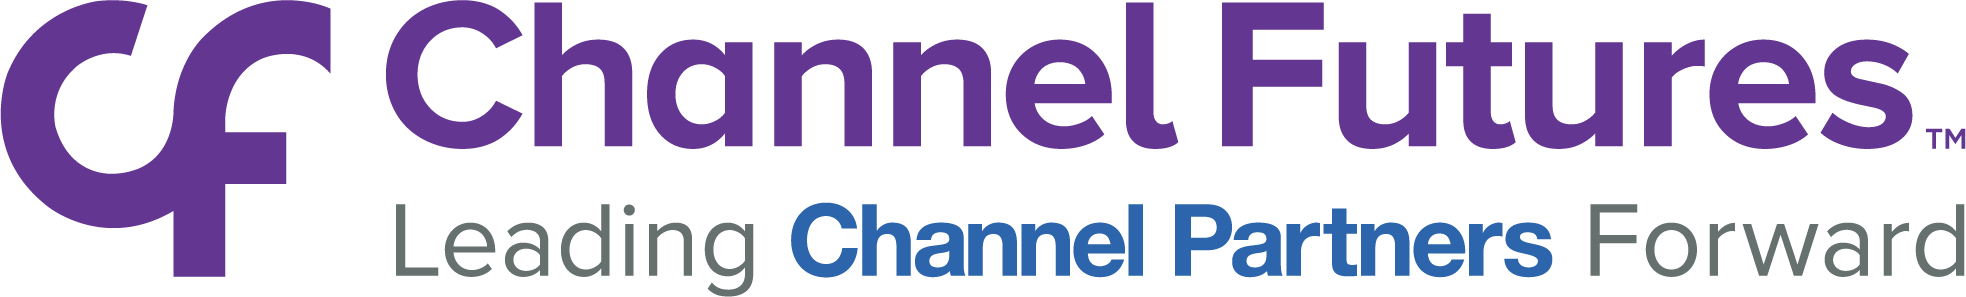 Channel Futures: Leading Channel Partners Forward.